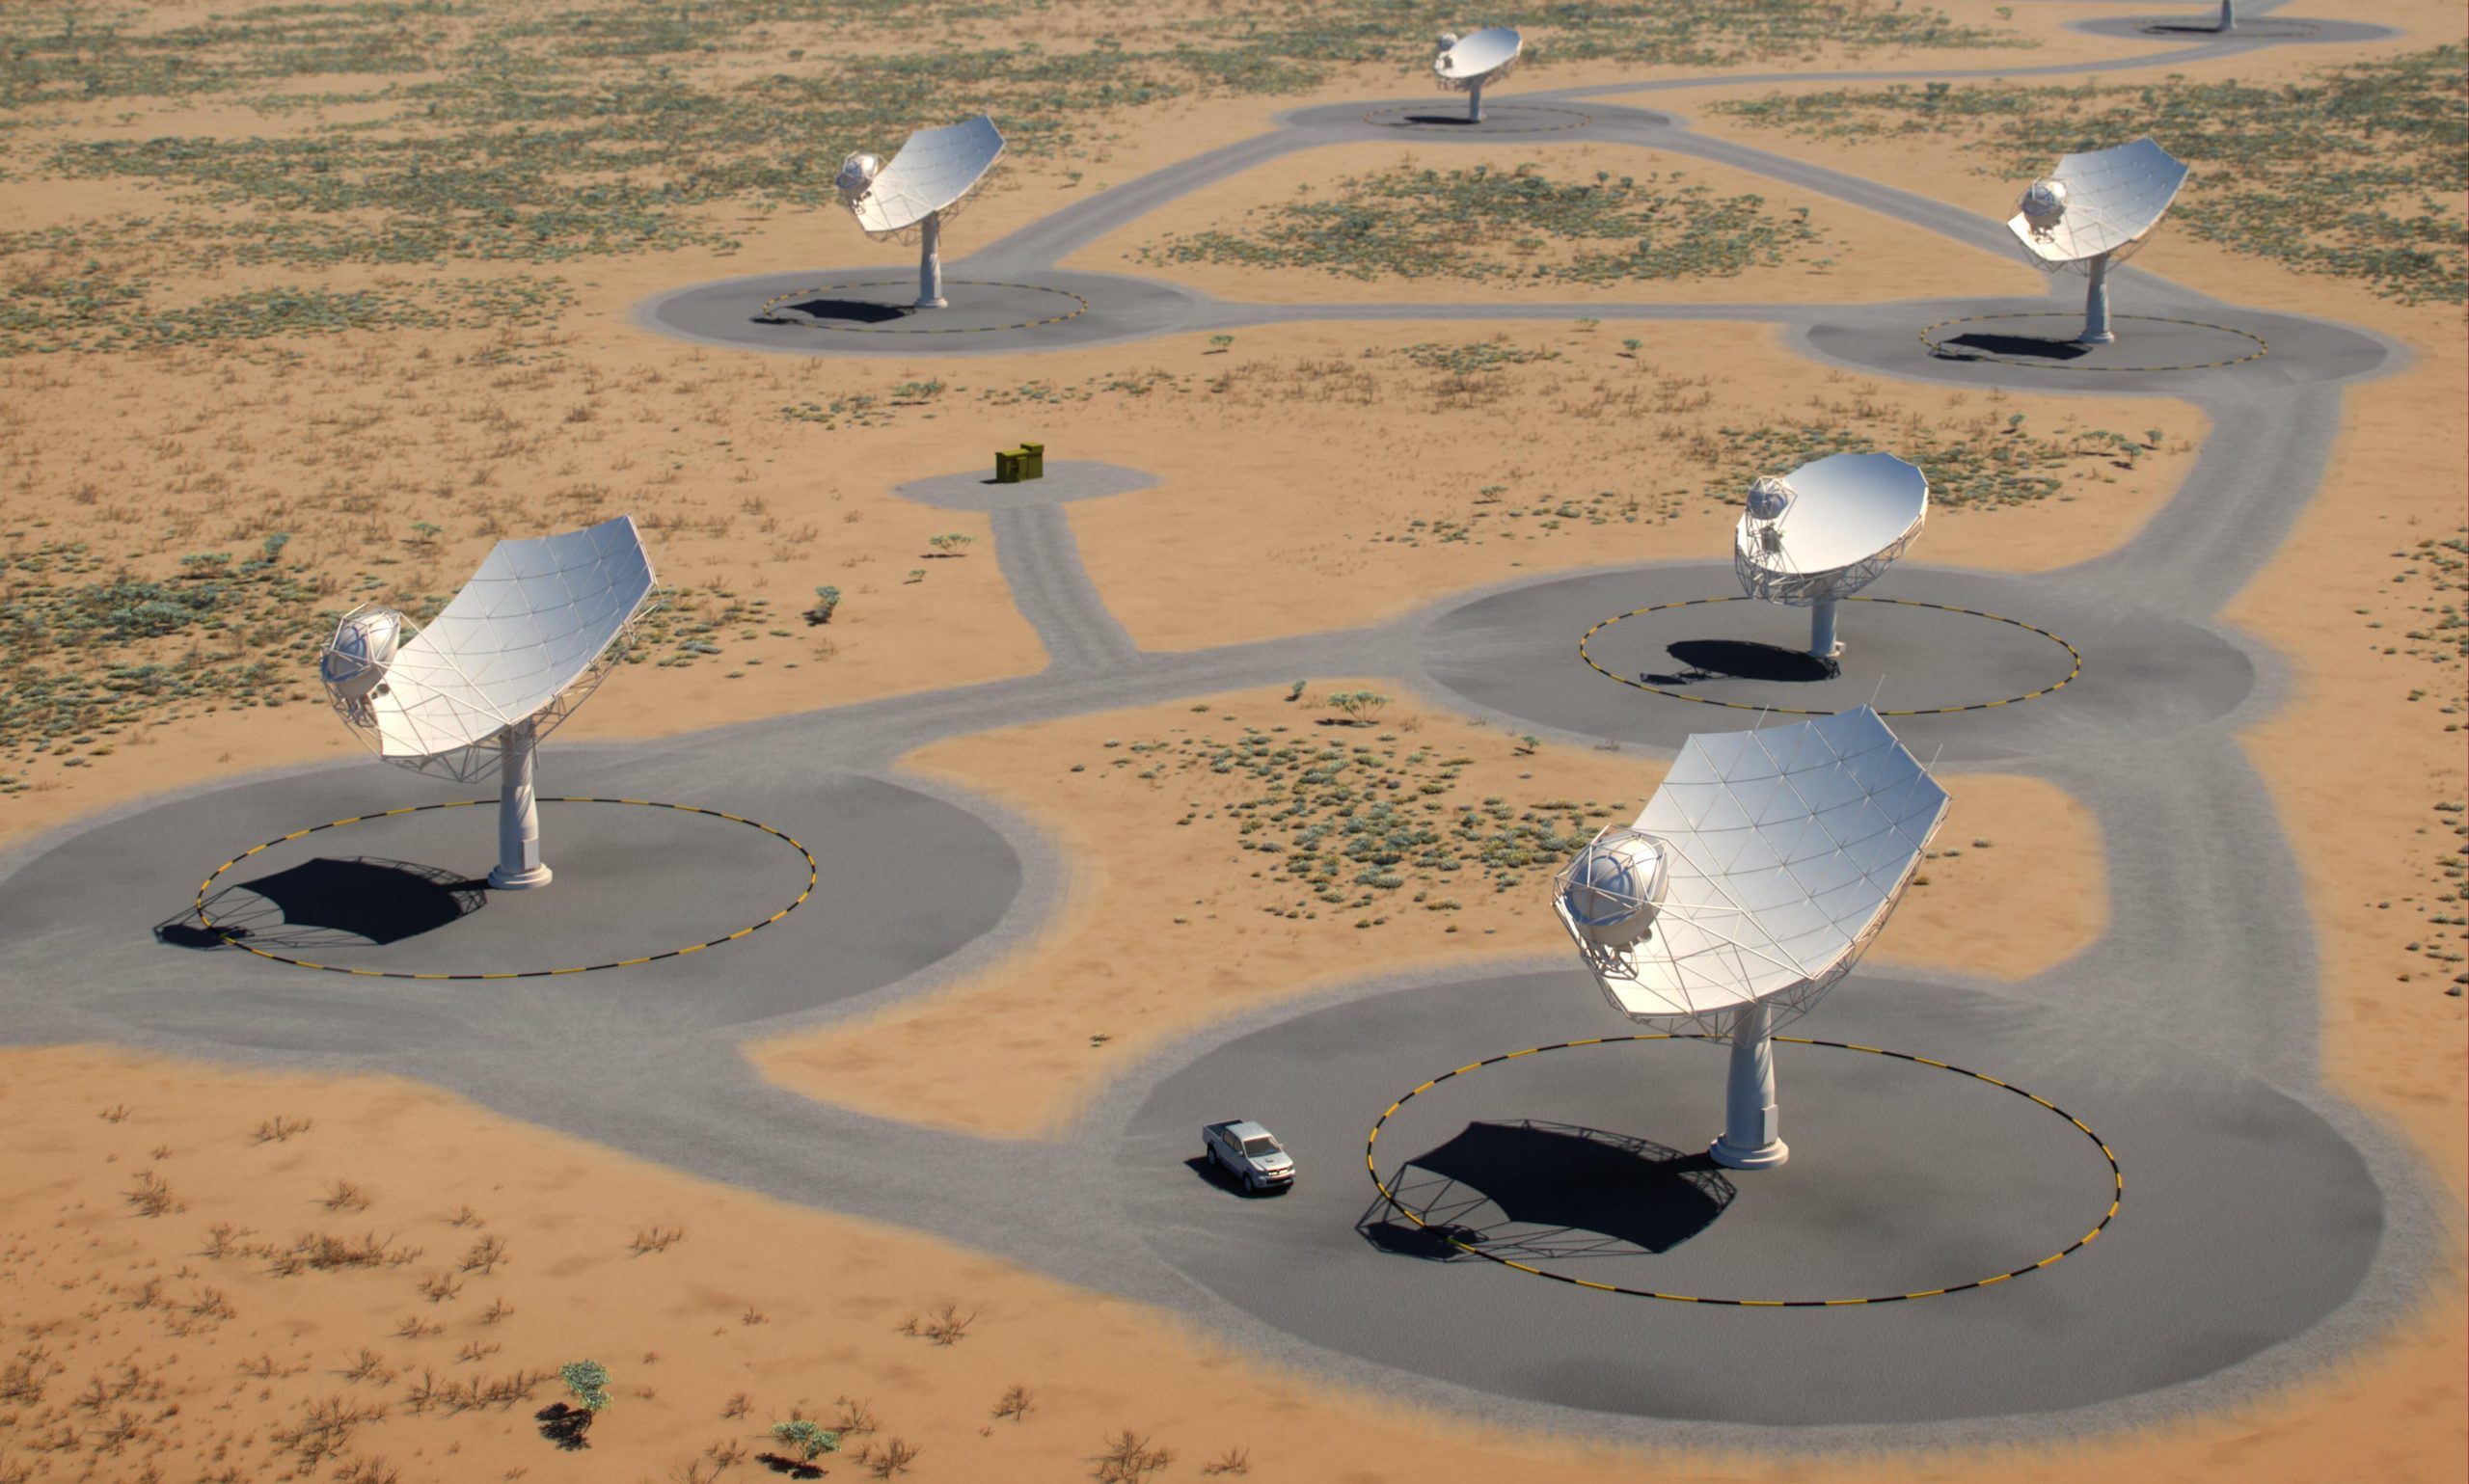 Construction Of The World’s Biggest Radio Telescope Is Officially Underway